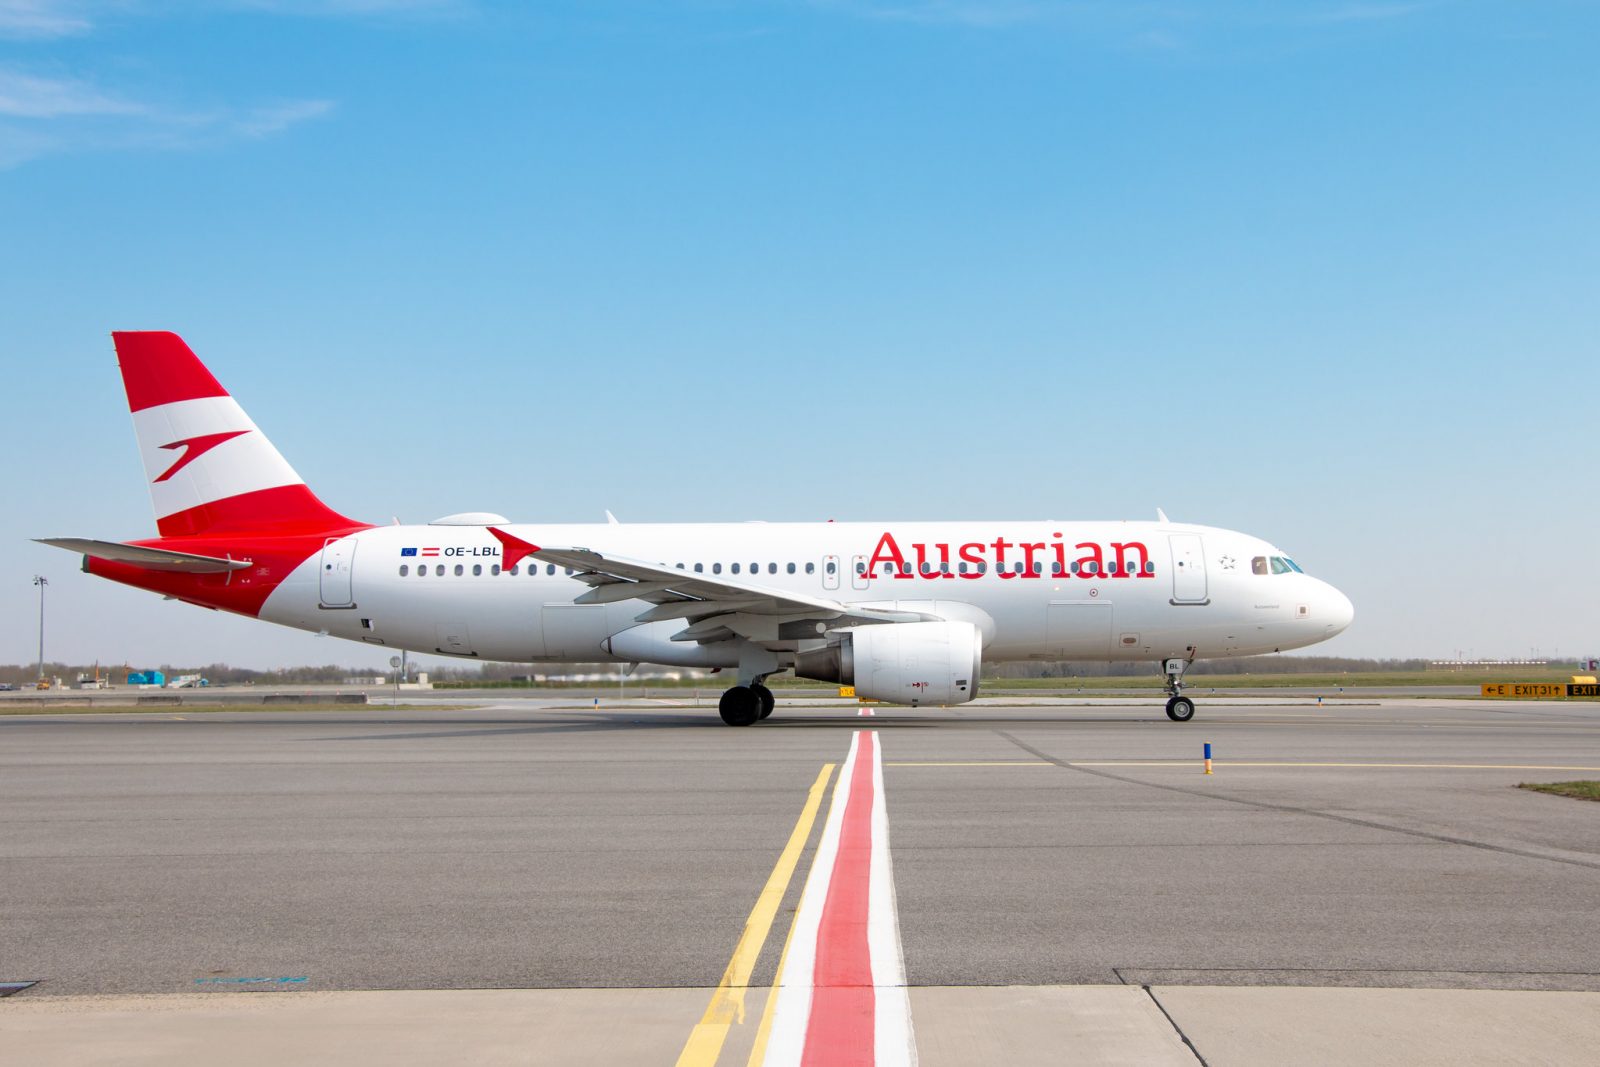 Armed Robbers Steal €10 Million from Austrian Airlines Plane As its Preparing to Takeoff